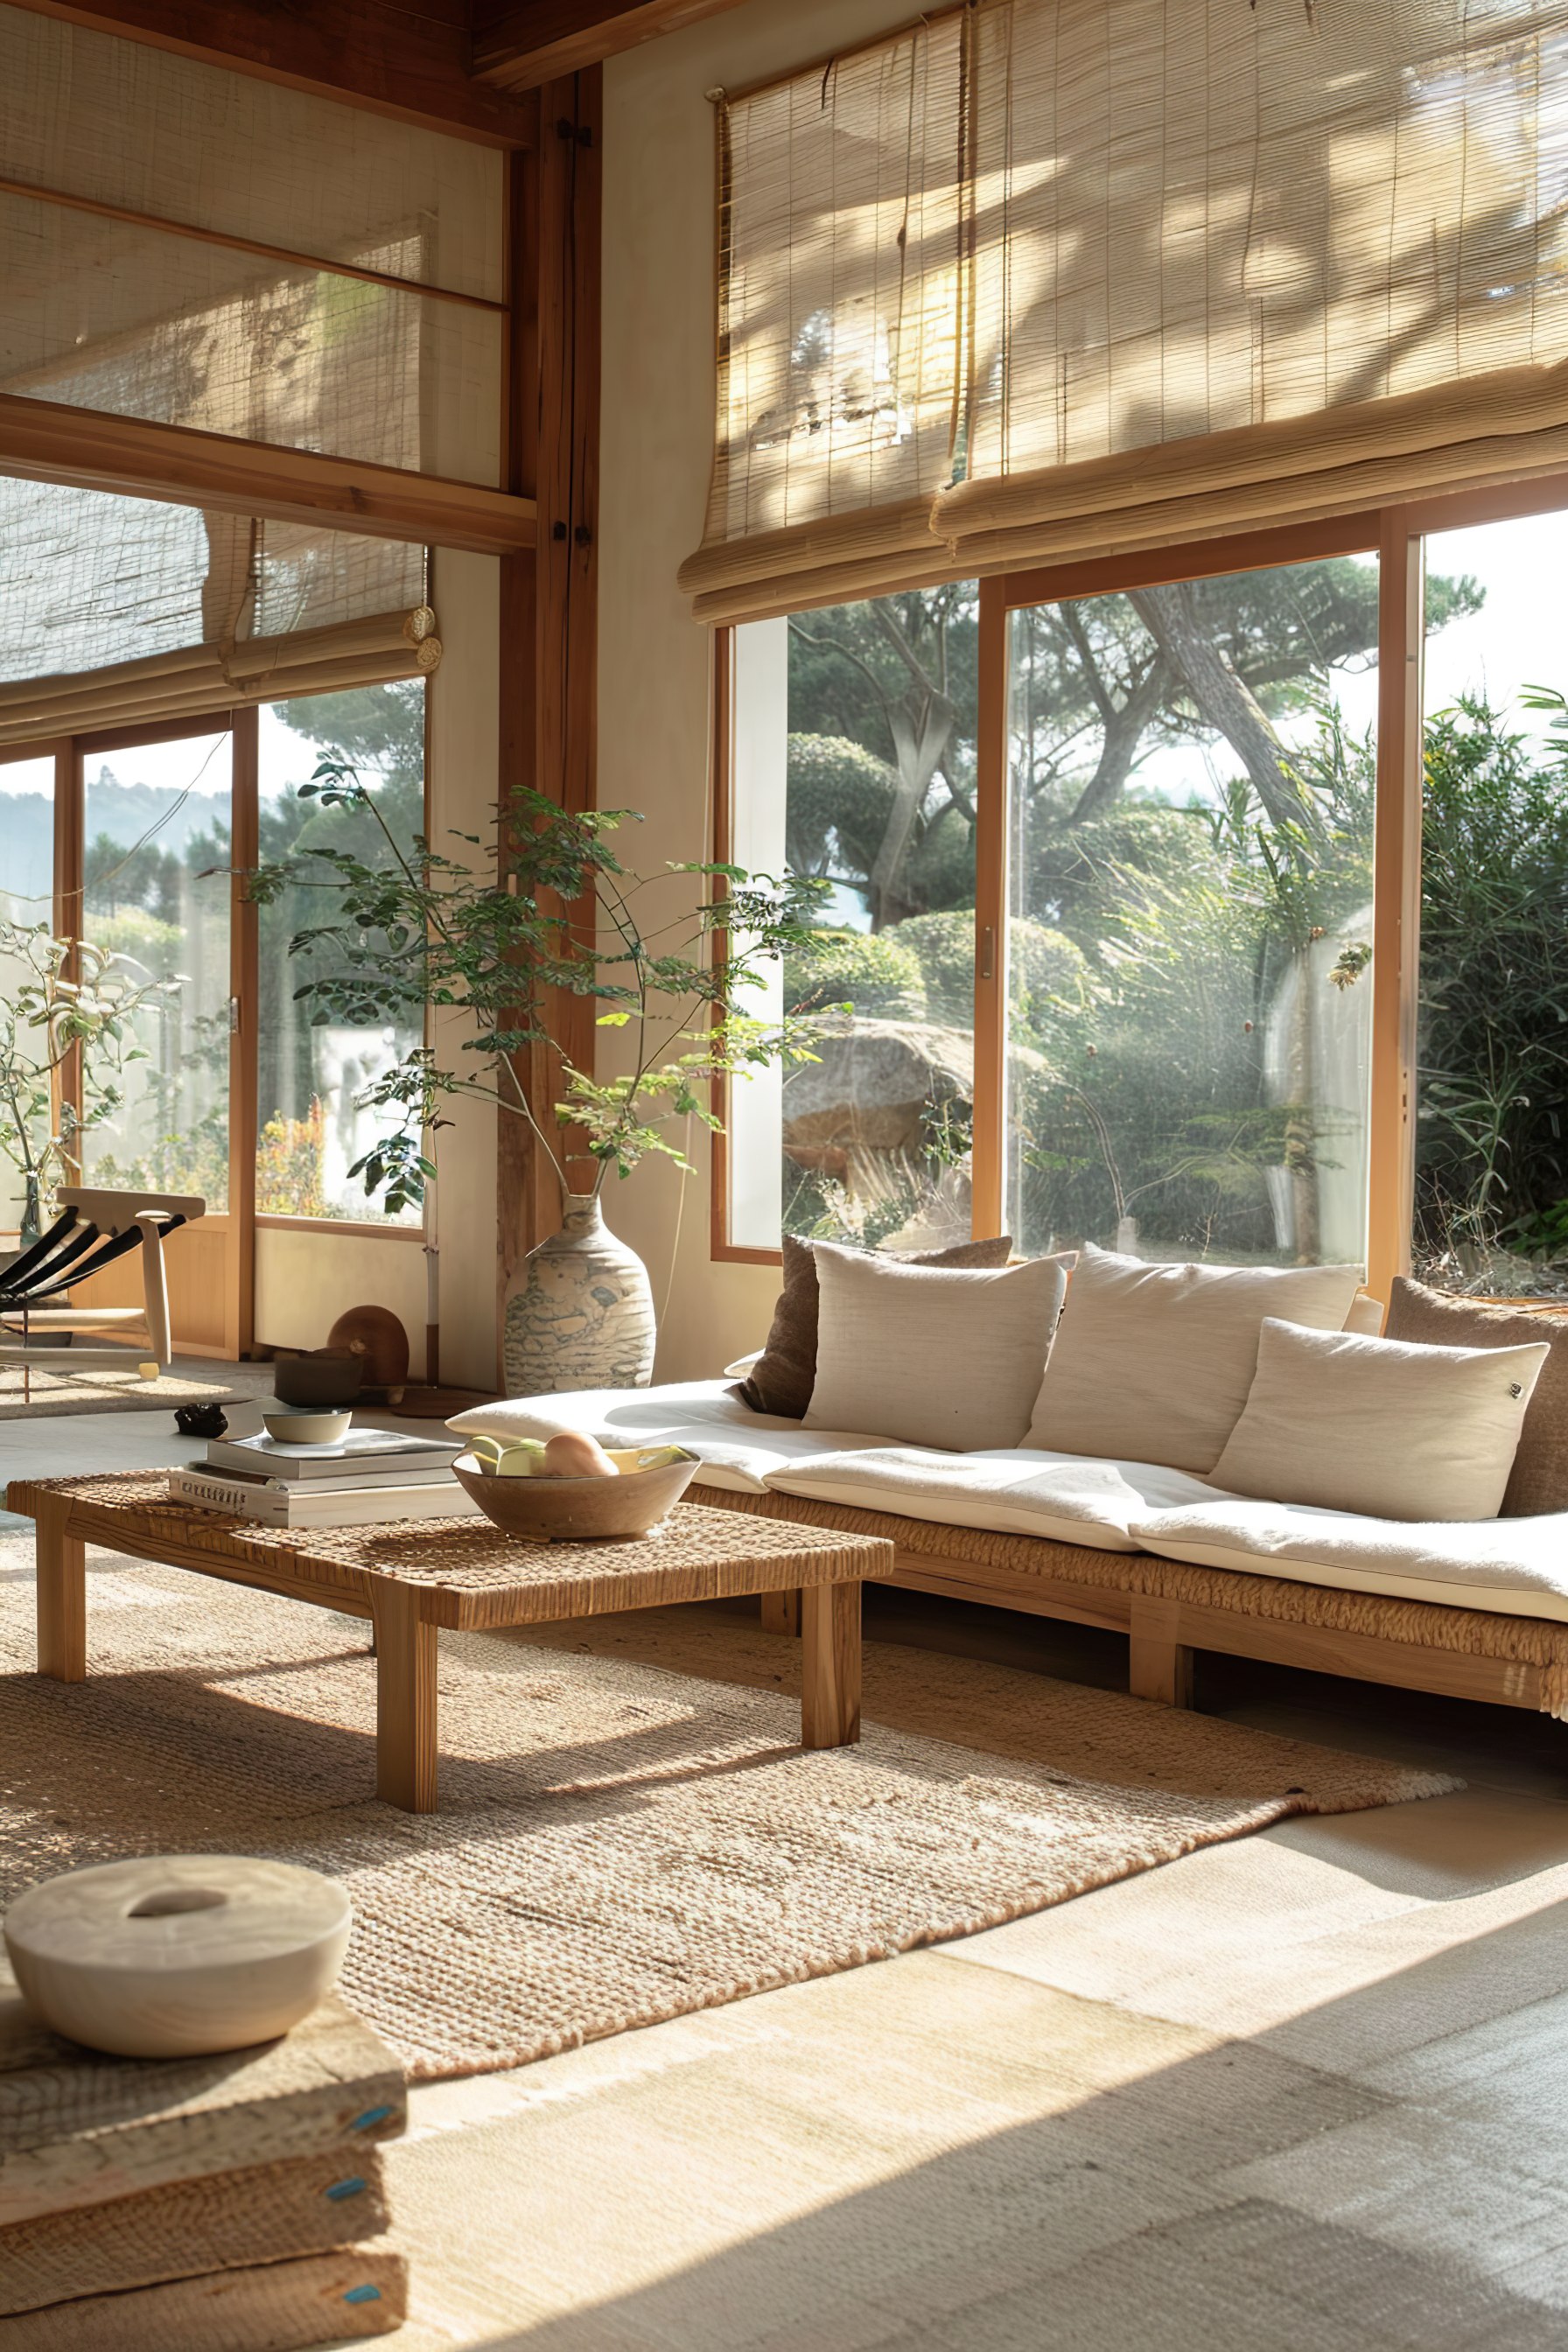 A serene living room with bamboo shades, a low wooden table, a sofa with cushions, and sunlight filtering through windows.